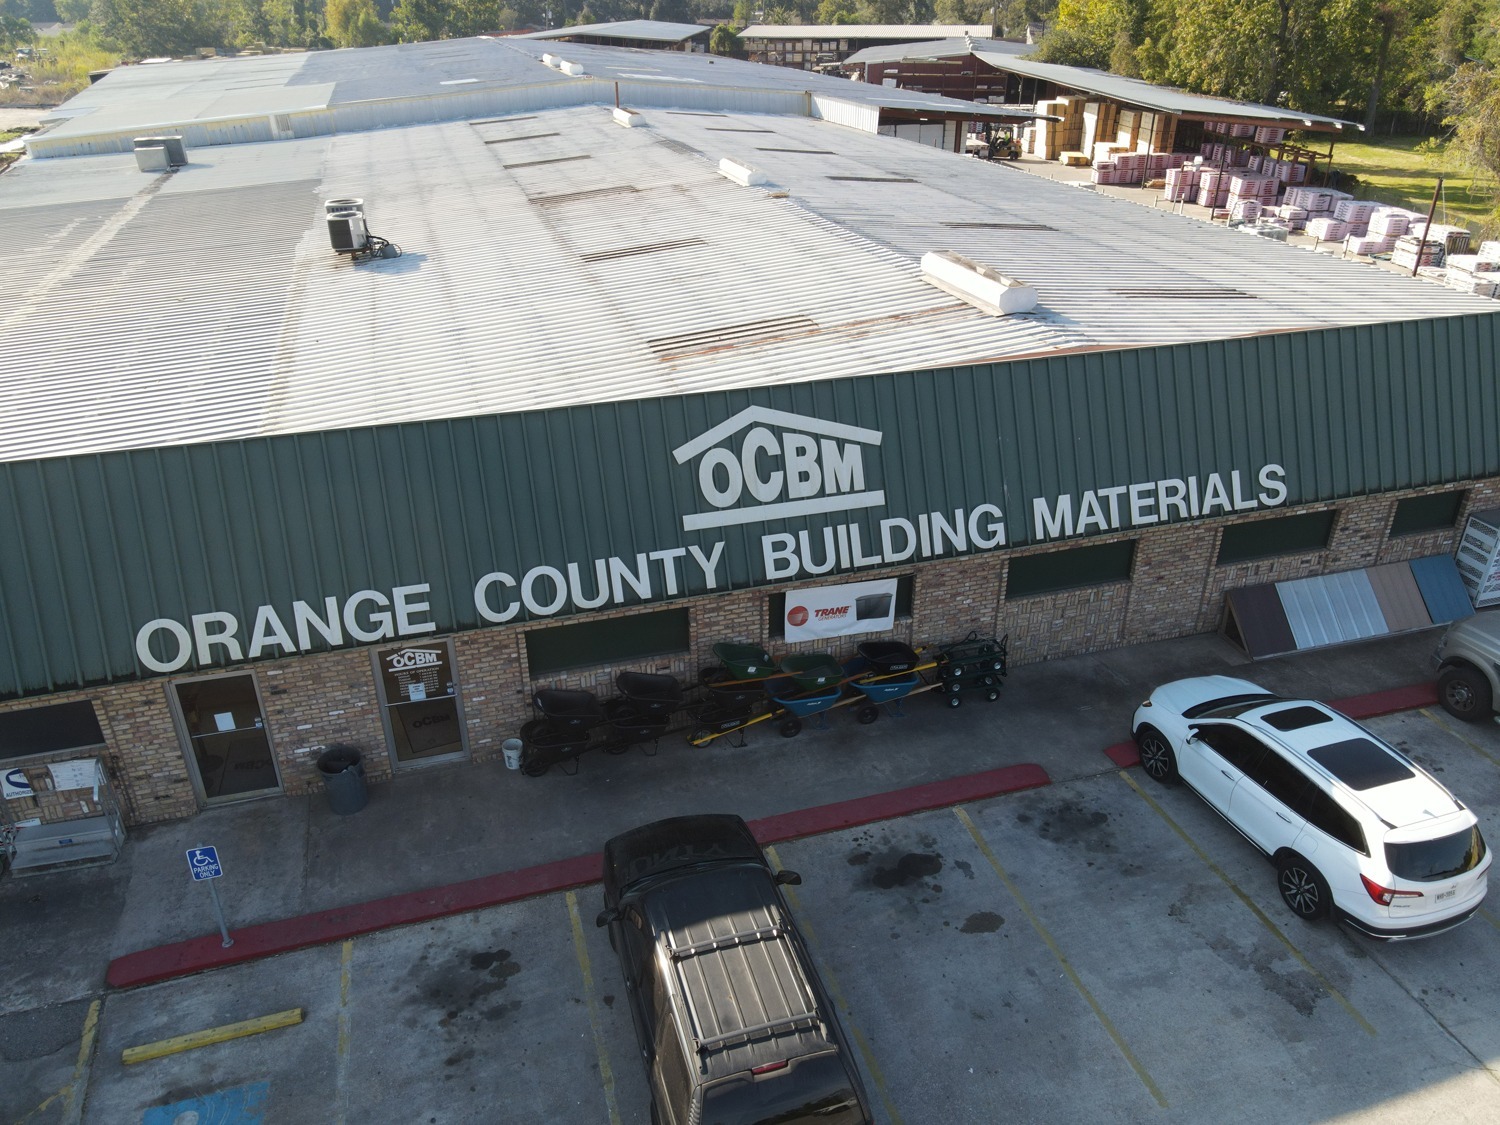 Read our comprehensive review of Orange County Building Materials in Vidor, TX. Learn about their commitment to quality, exceptional service, and extensive range of construction materials and building supplies.